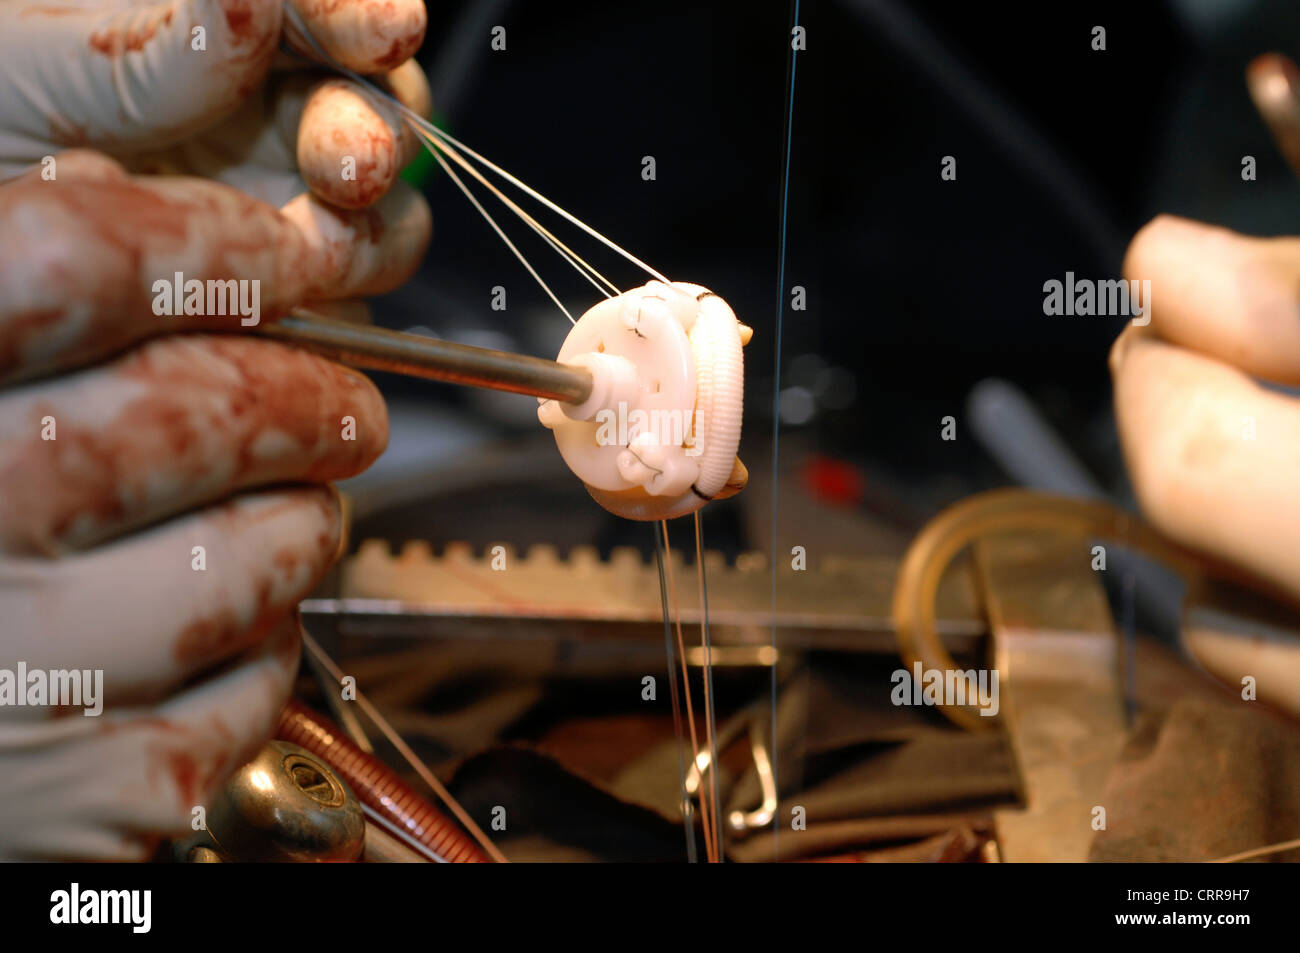 Artificial Connection Equipment being used on heart valves Stock Photo